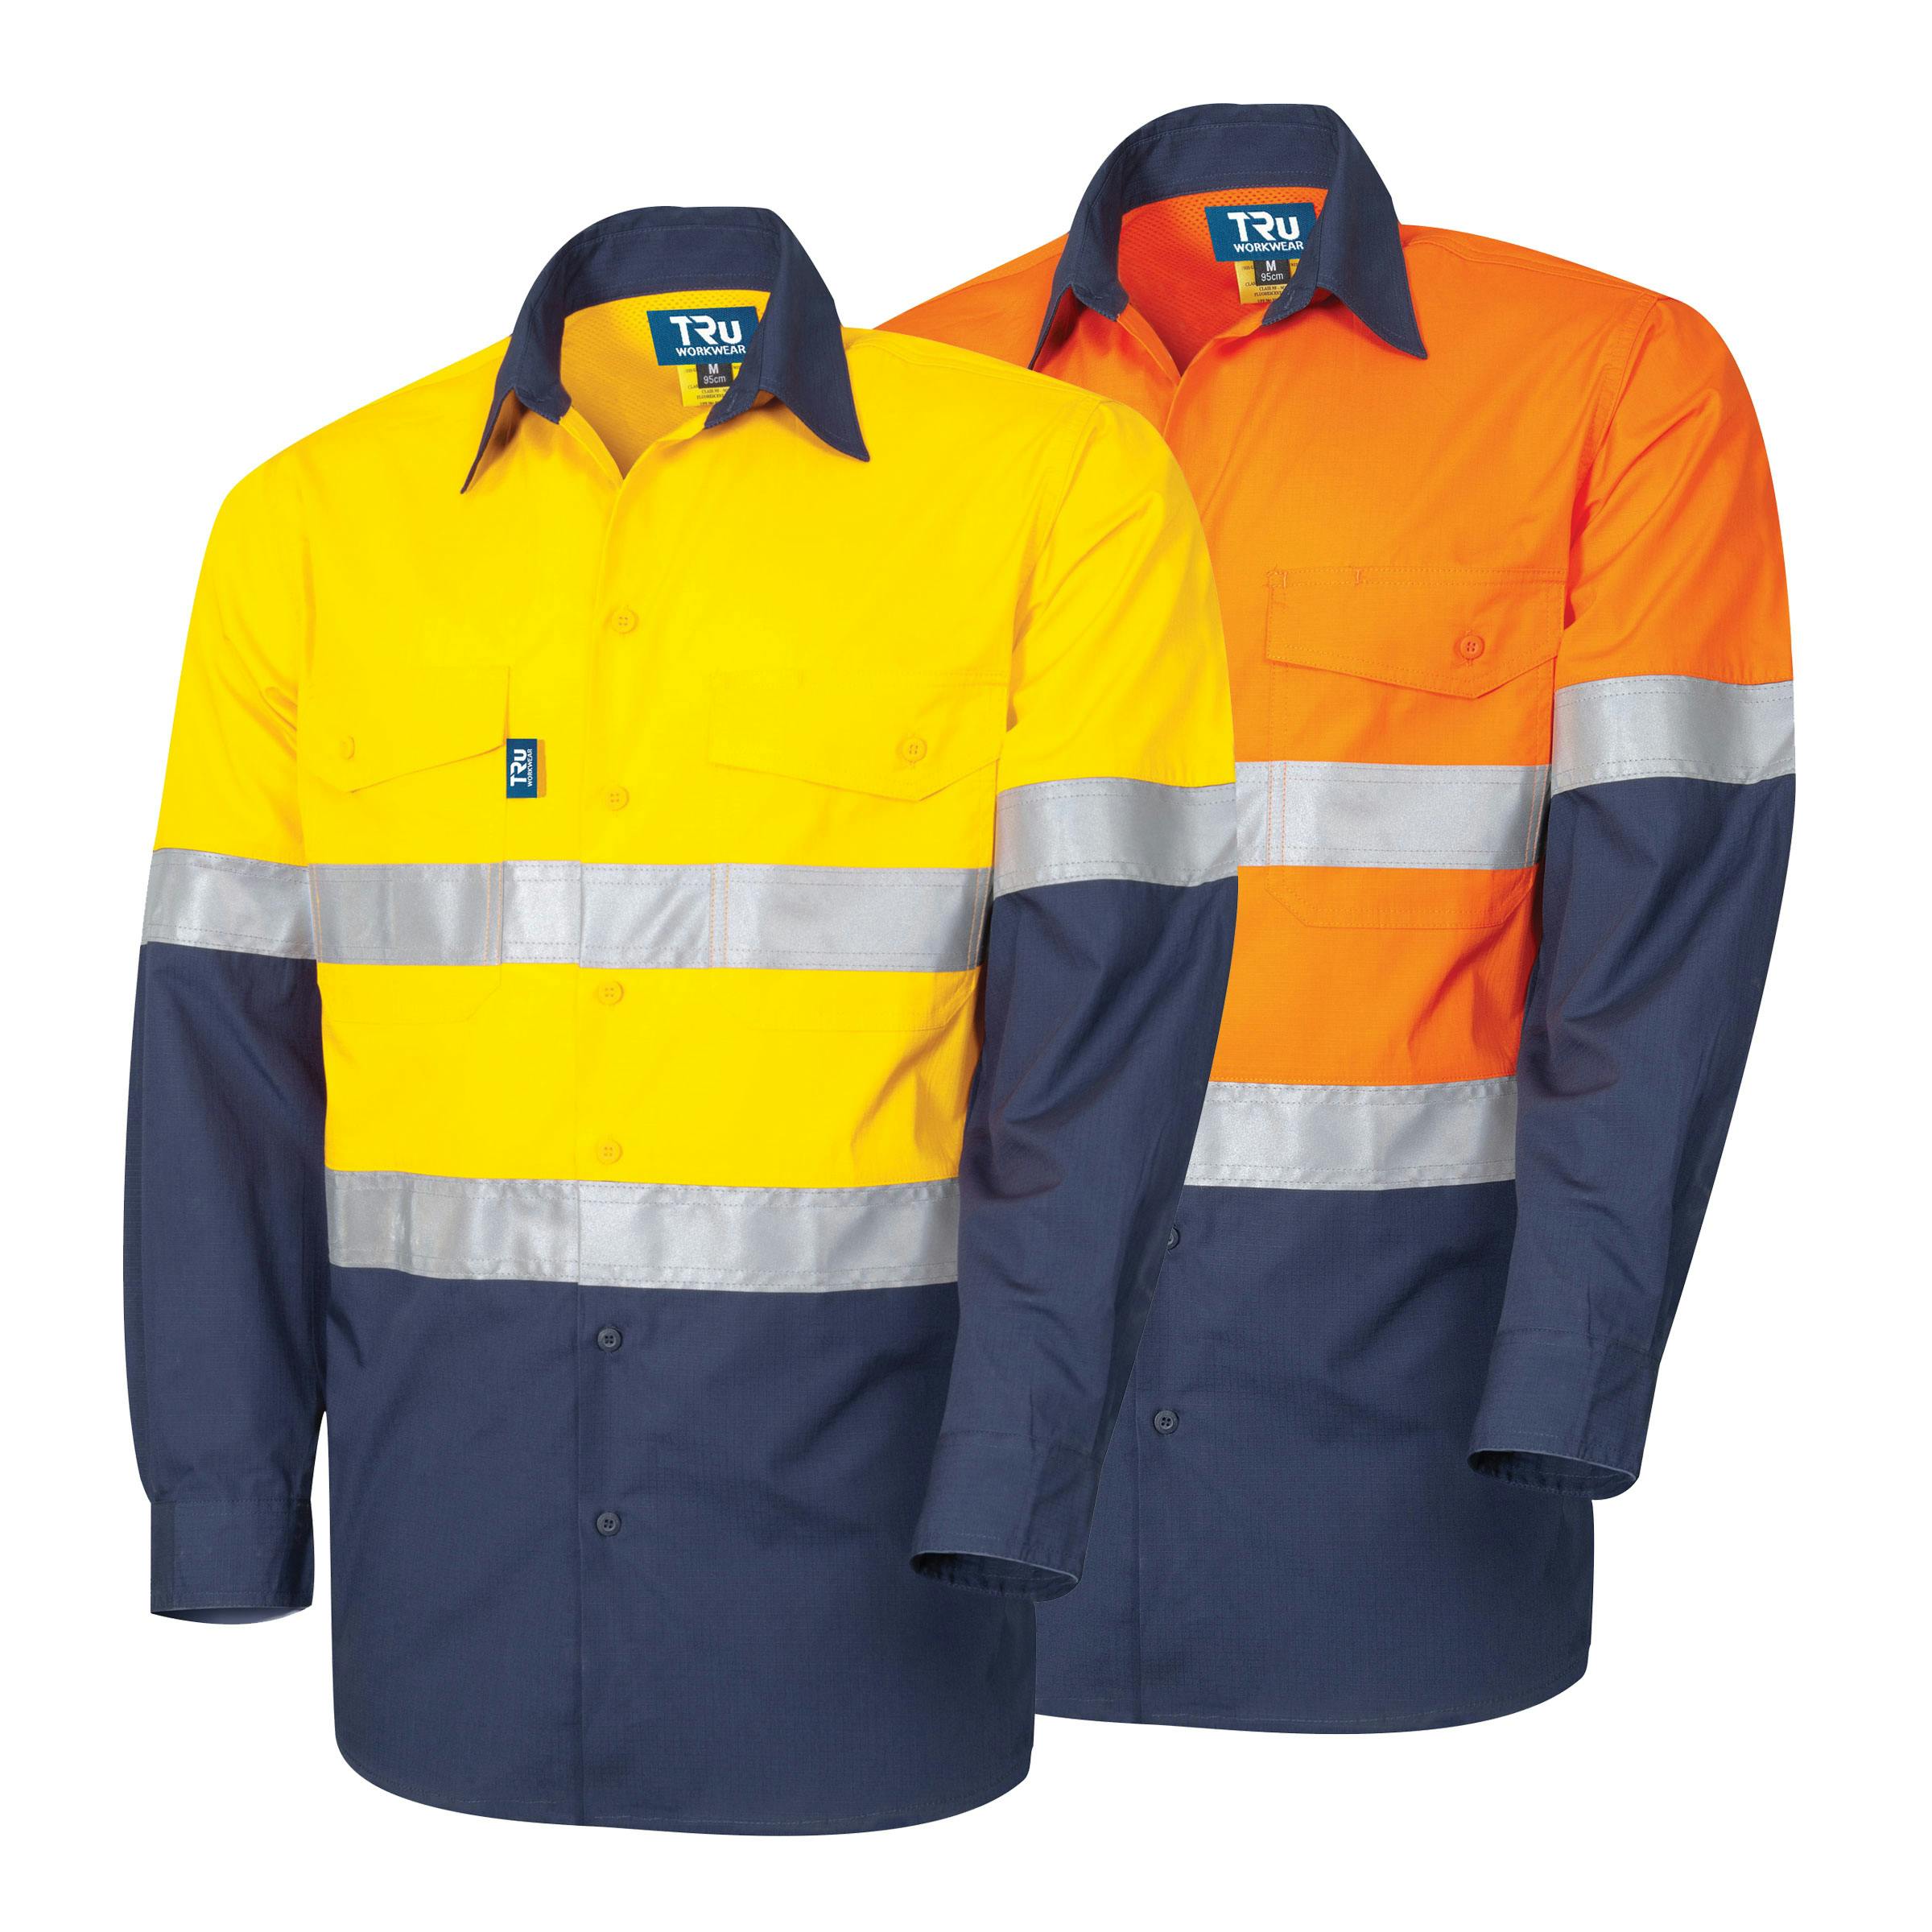 TRu Workwear Shirt 145gsm L/S Two Tone Cotton Rip-STop With 3M Two Hoop Reflective Tape And Horizontal Cooling Vents